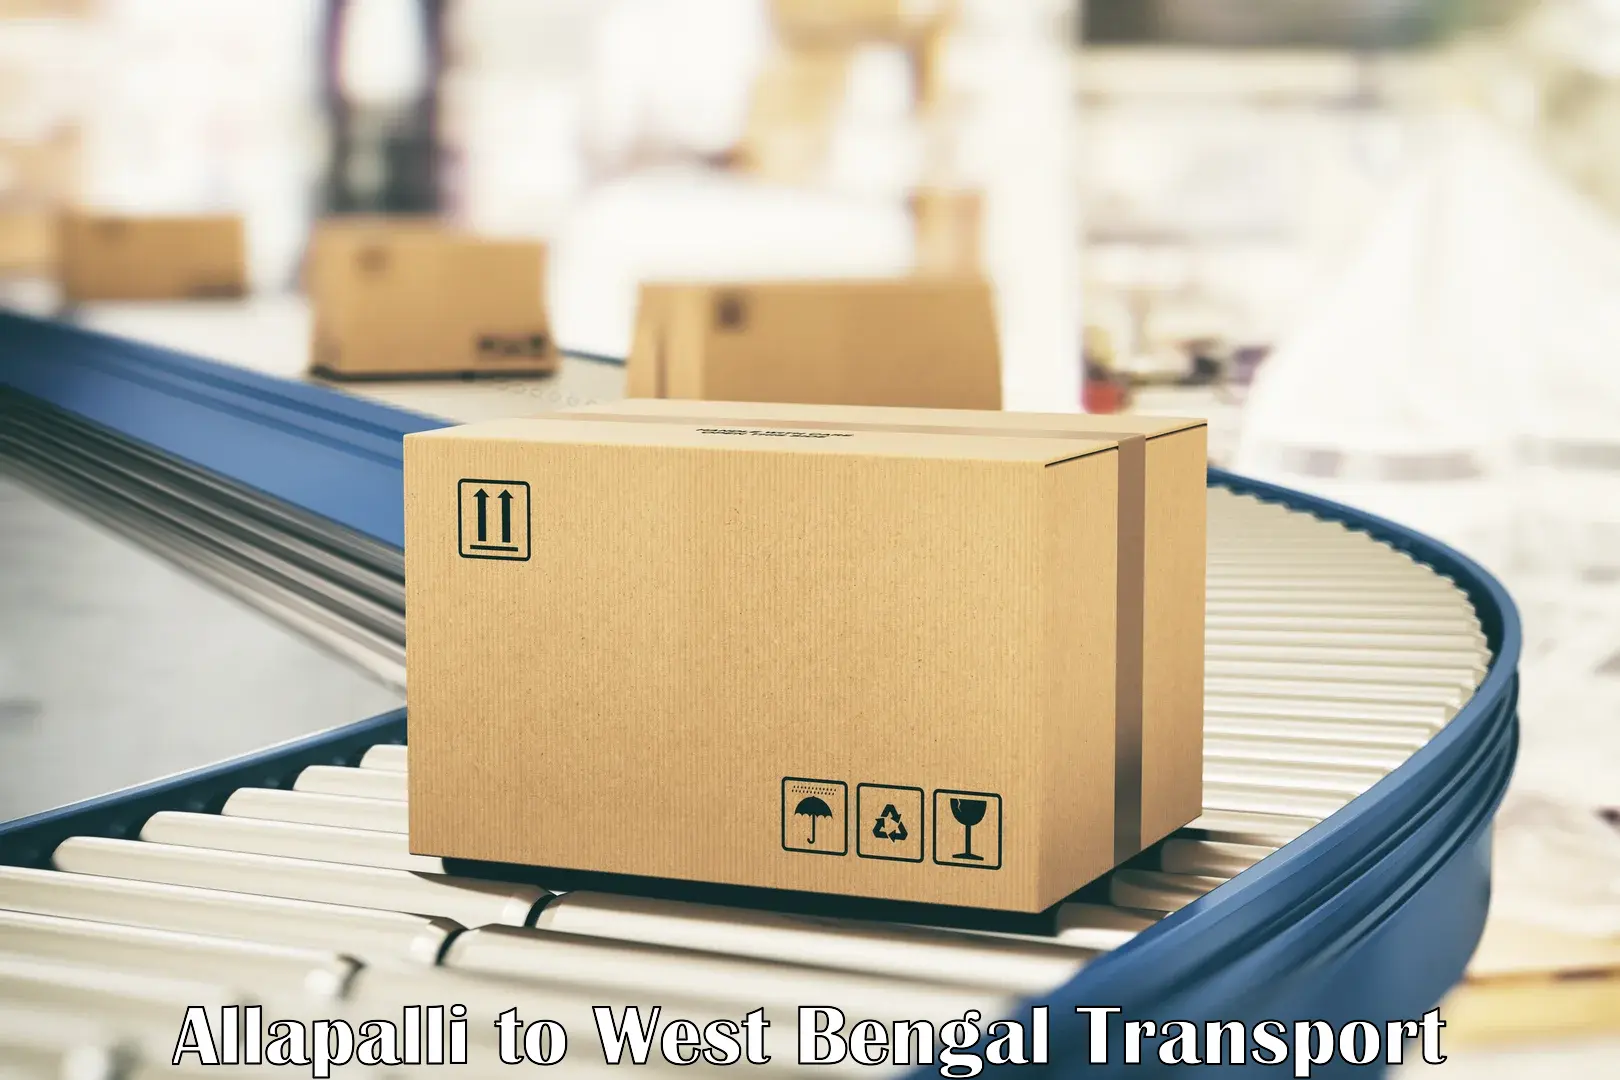 Nearby transport service Allapalli to West Bengal